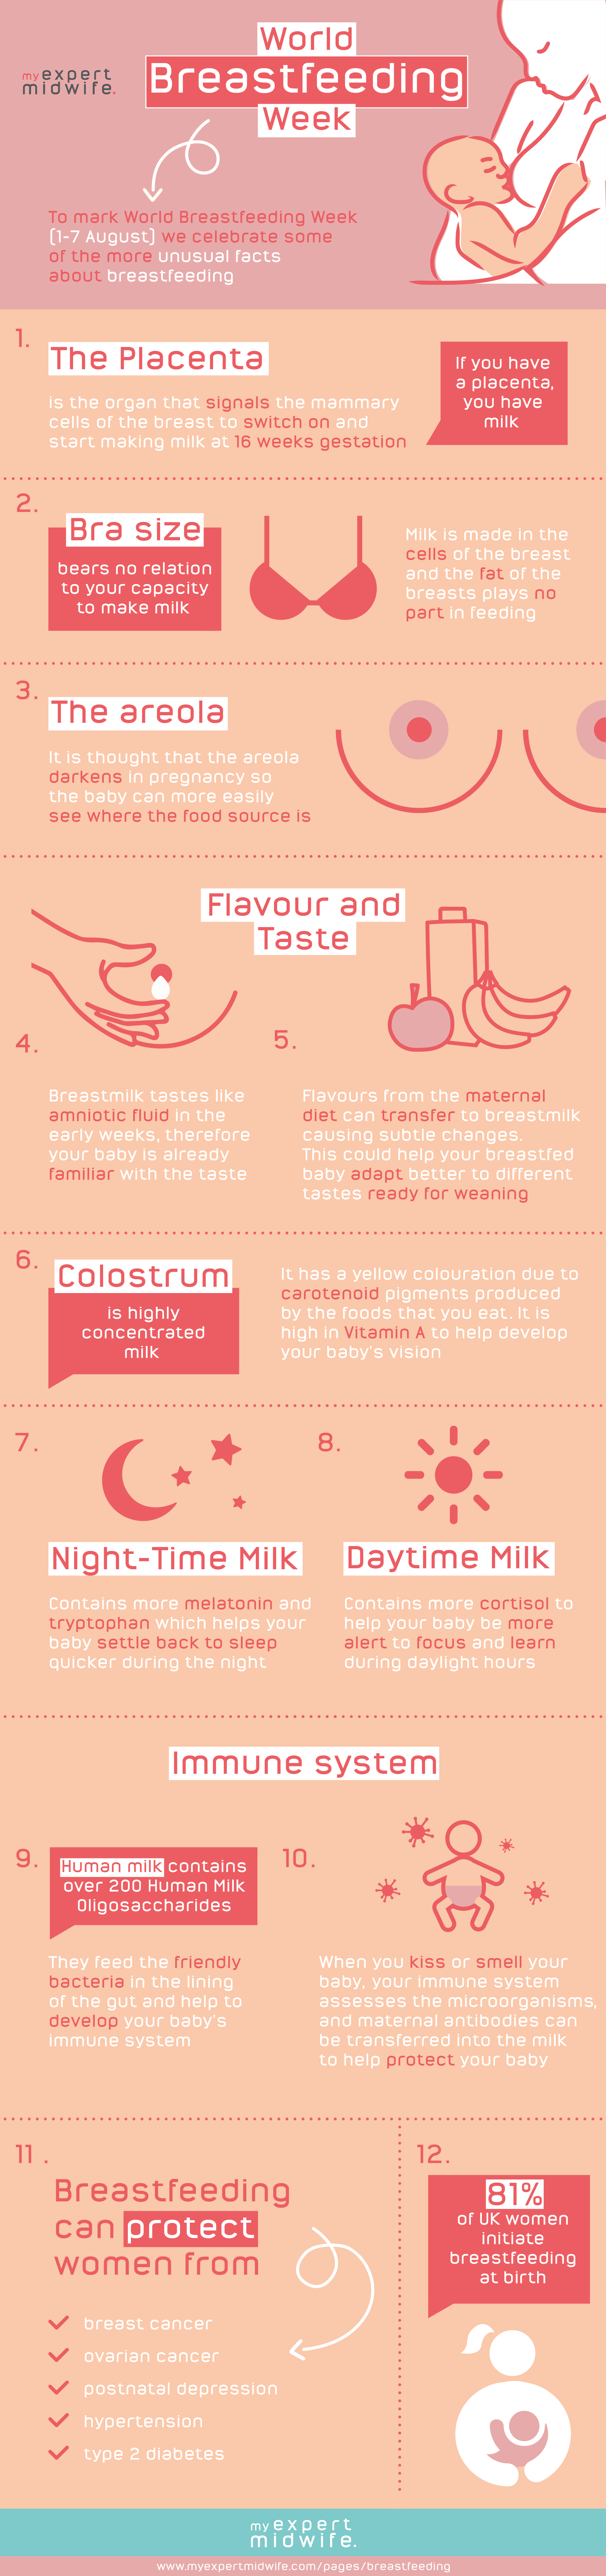 Infographic about breastfeeding